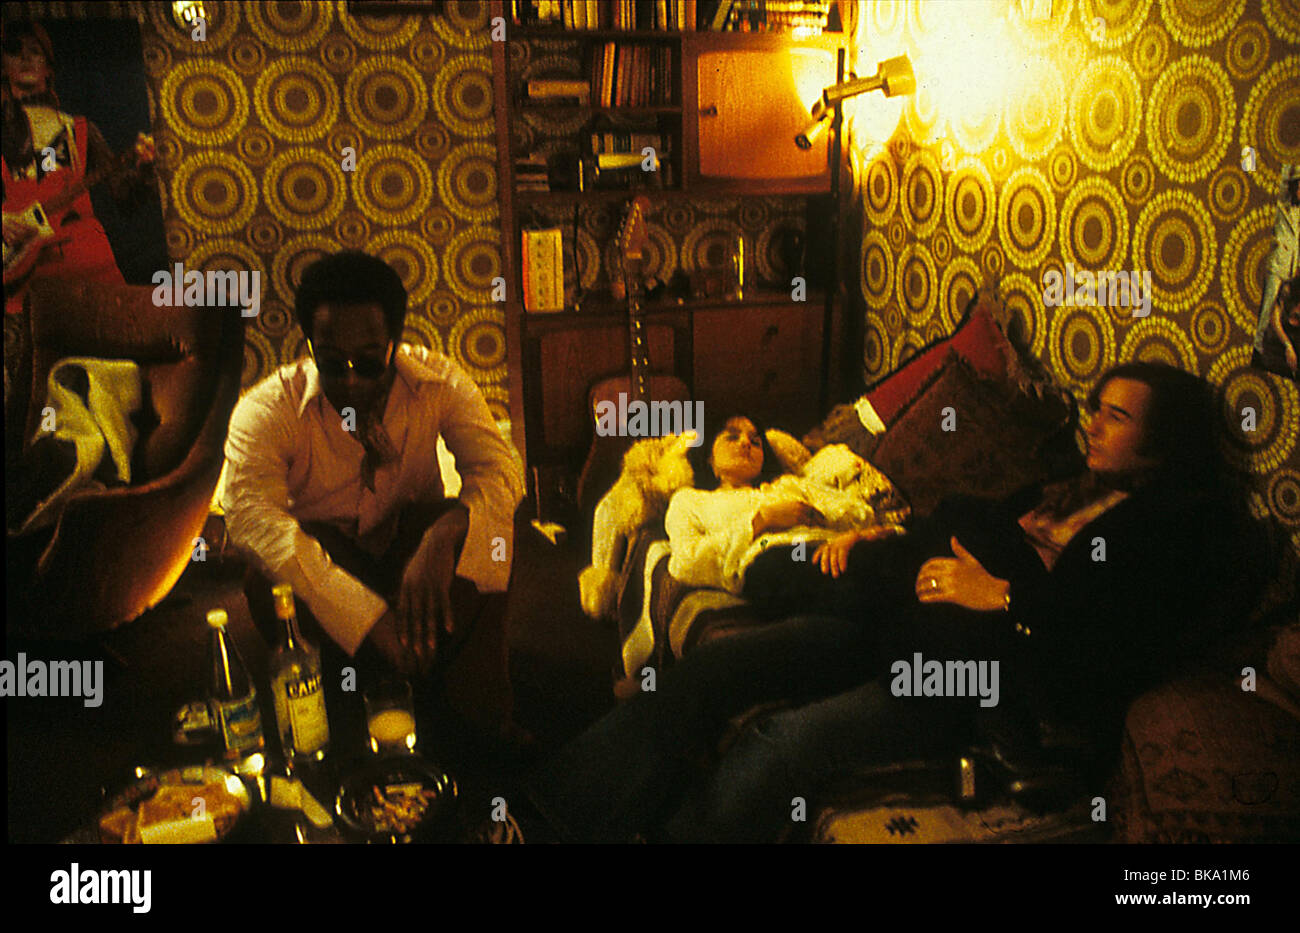 24 HOUR PARTY PEOPLE (2002) LENNIE JAMES, SHIRLEY HENDERSON, STEVE COOGAN 24PP 007 Stock Photo